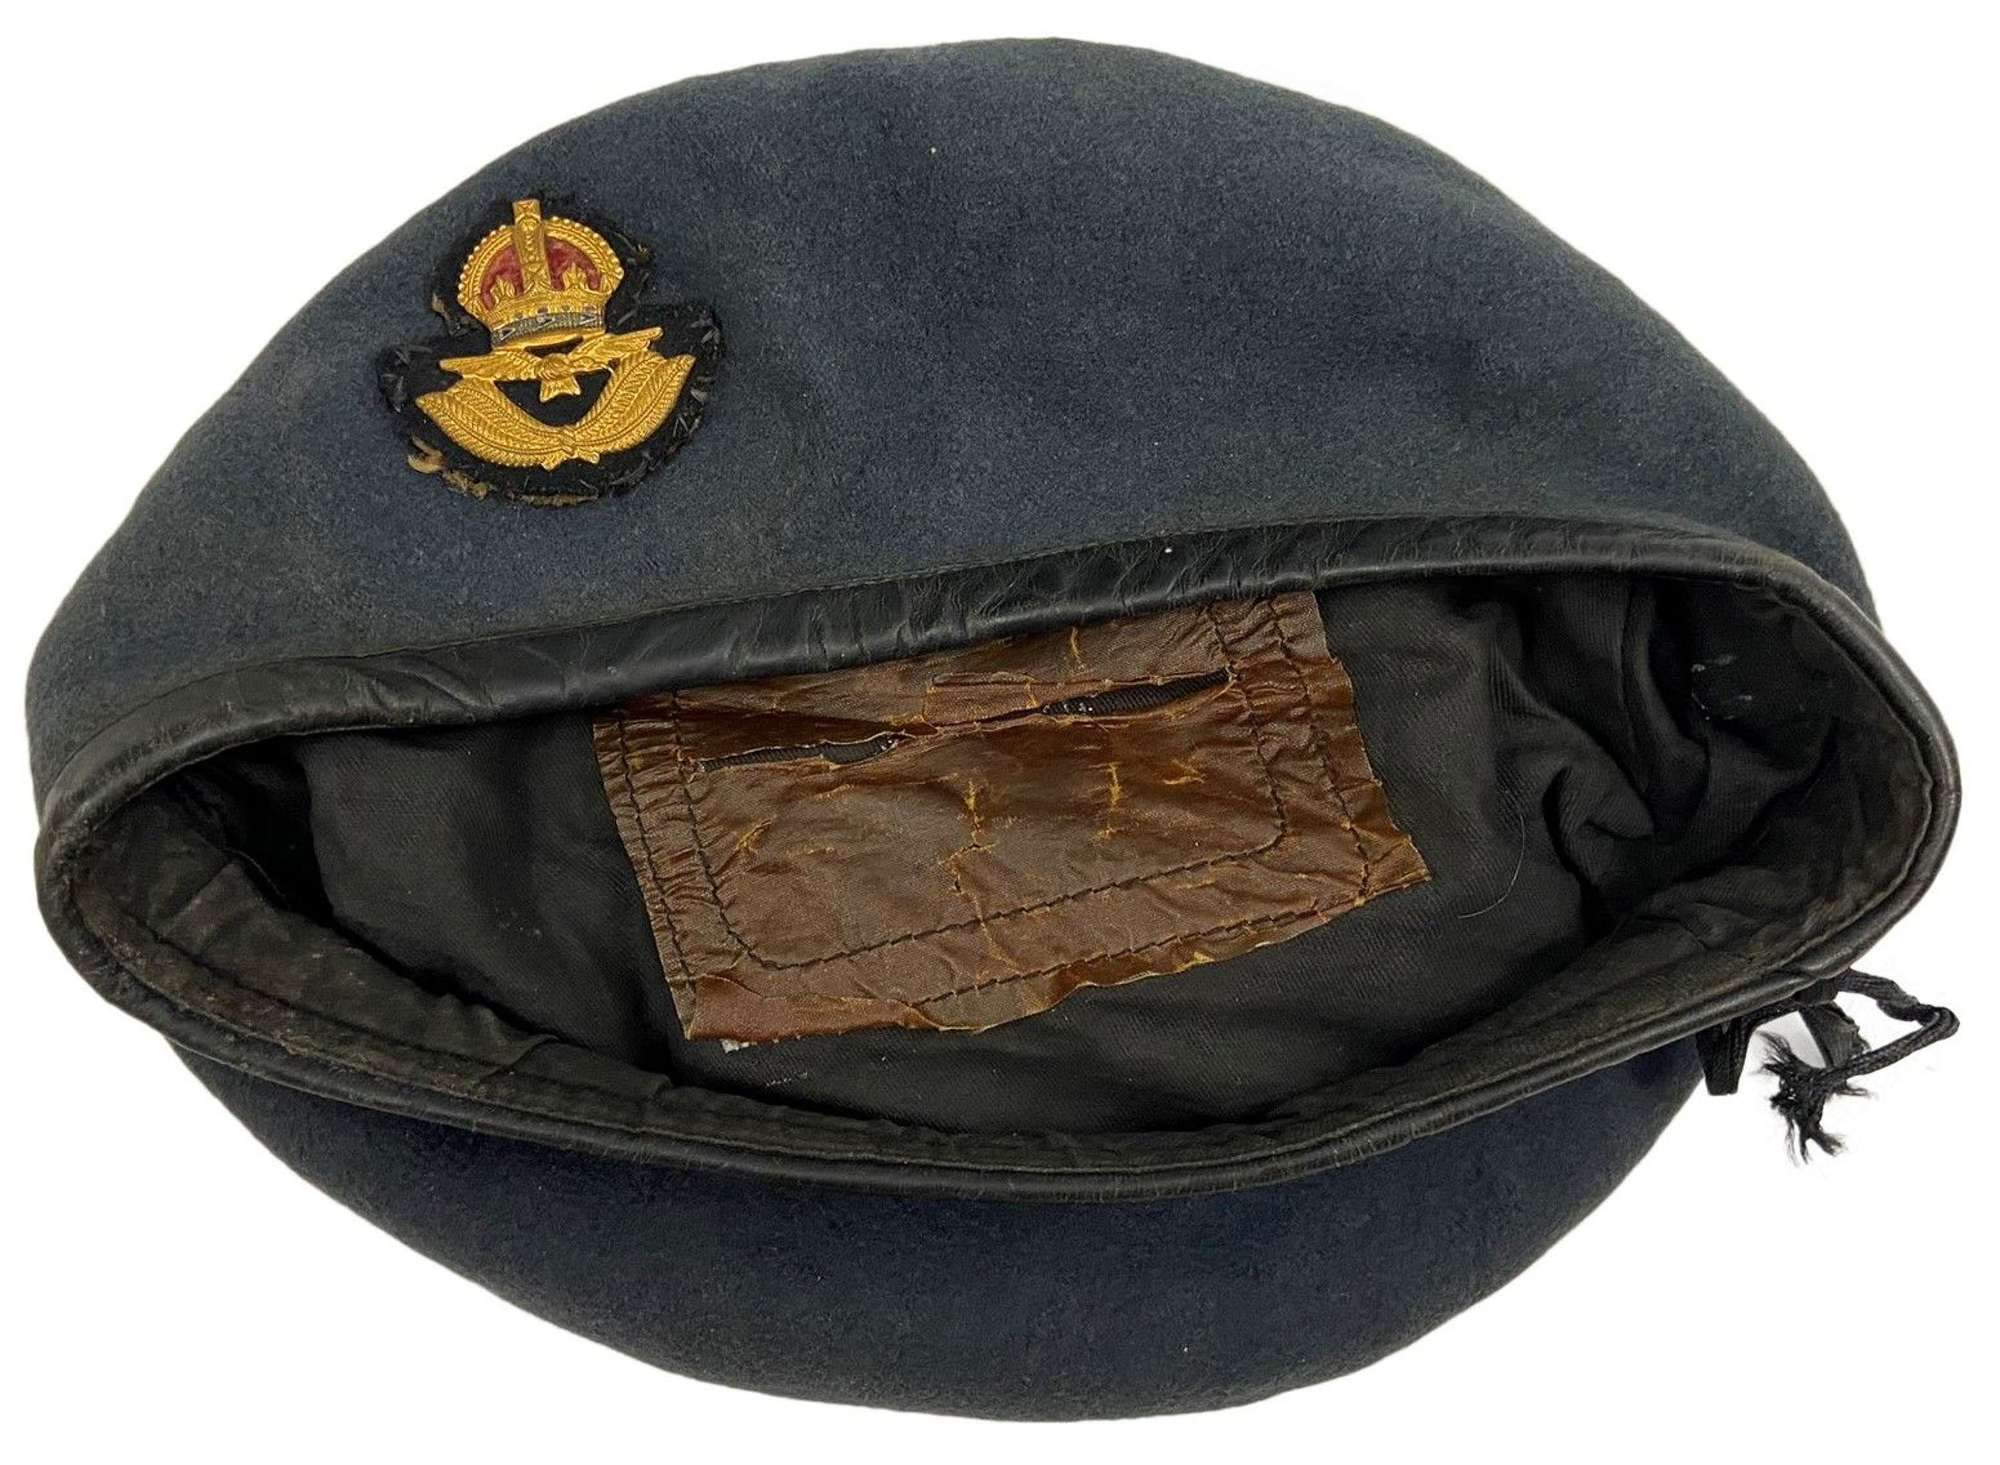 Original 1952 Dated Royal Air Force Officers Beret - Size 7 1/4